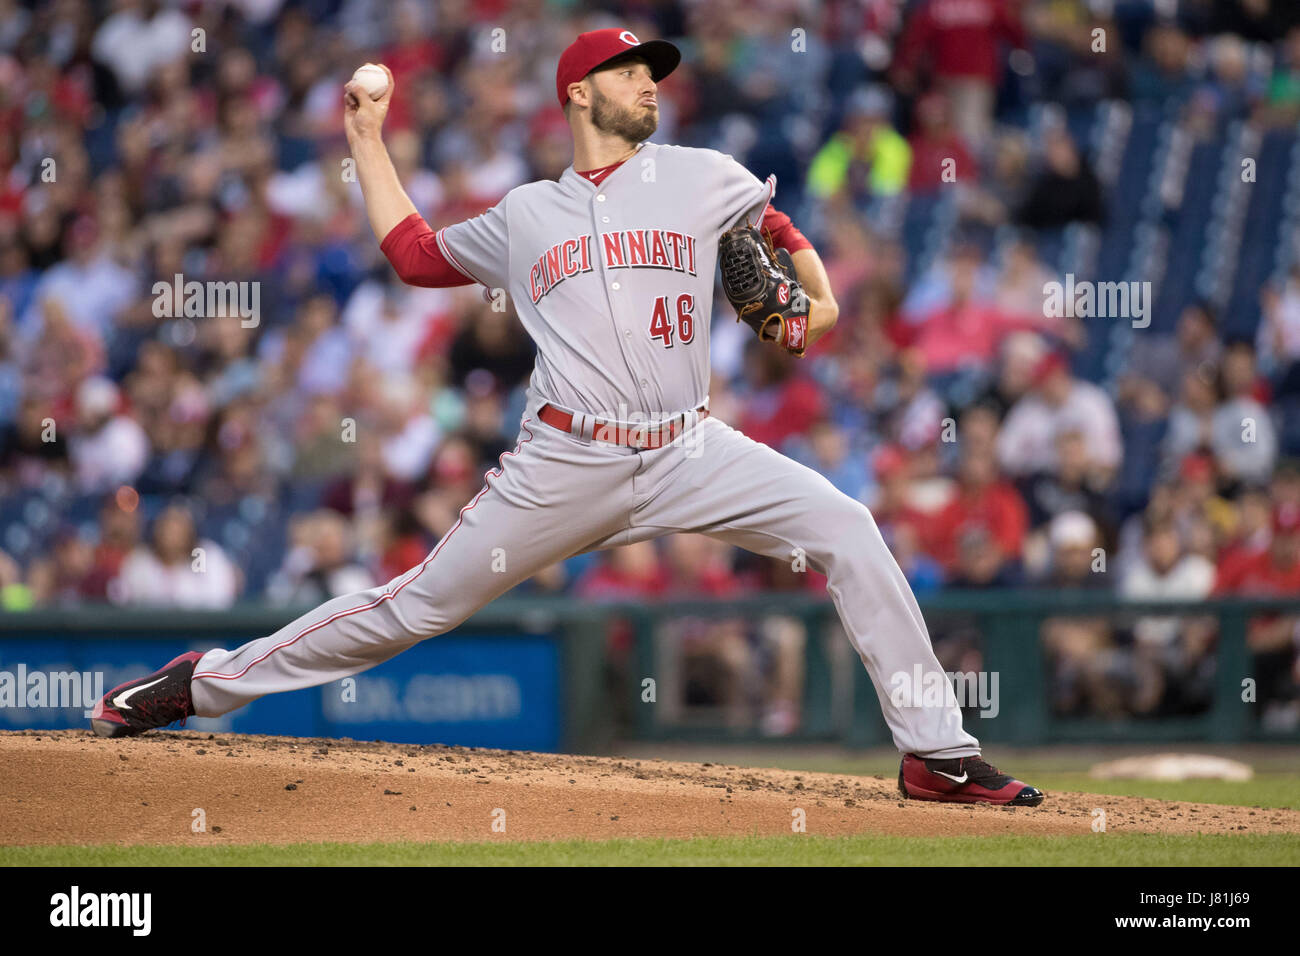 Philadelphia, Pennsylvania, USA. 26th May, 2017. Cincinnati Reds starting pitcher Tim Adleman (46) throws a pitch during the MLB game between the Cincinnati Reds and Philadelphia Phillies at Citizens Bank Park in Philadelphia, Pennsylvania. Christopher Szagola/CSM/Alamy Live News Stock Photo